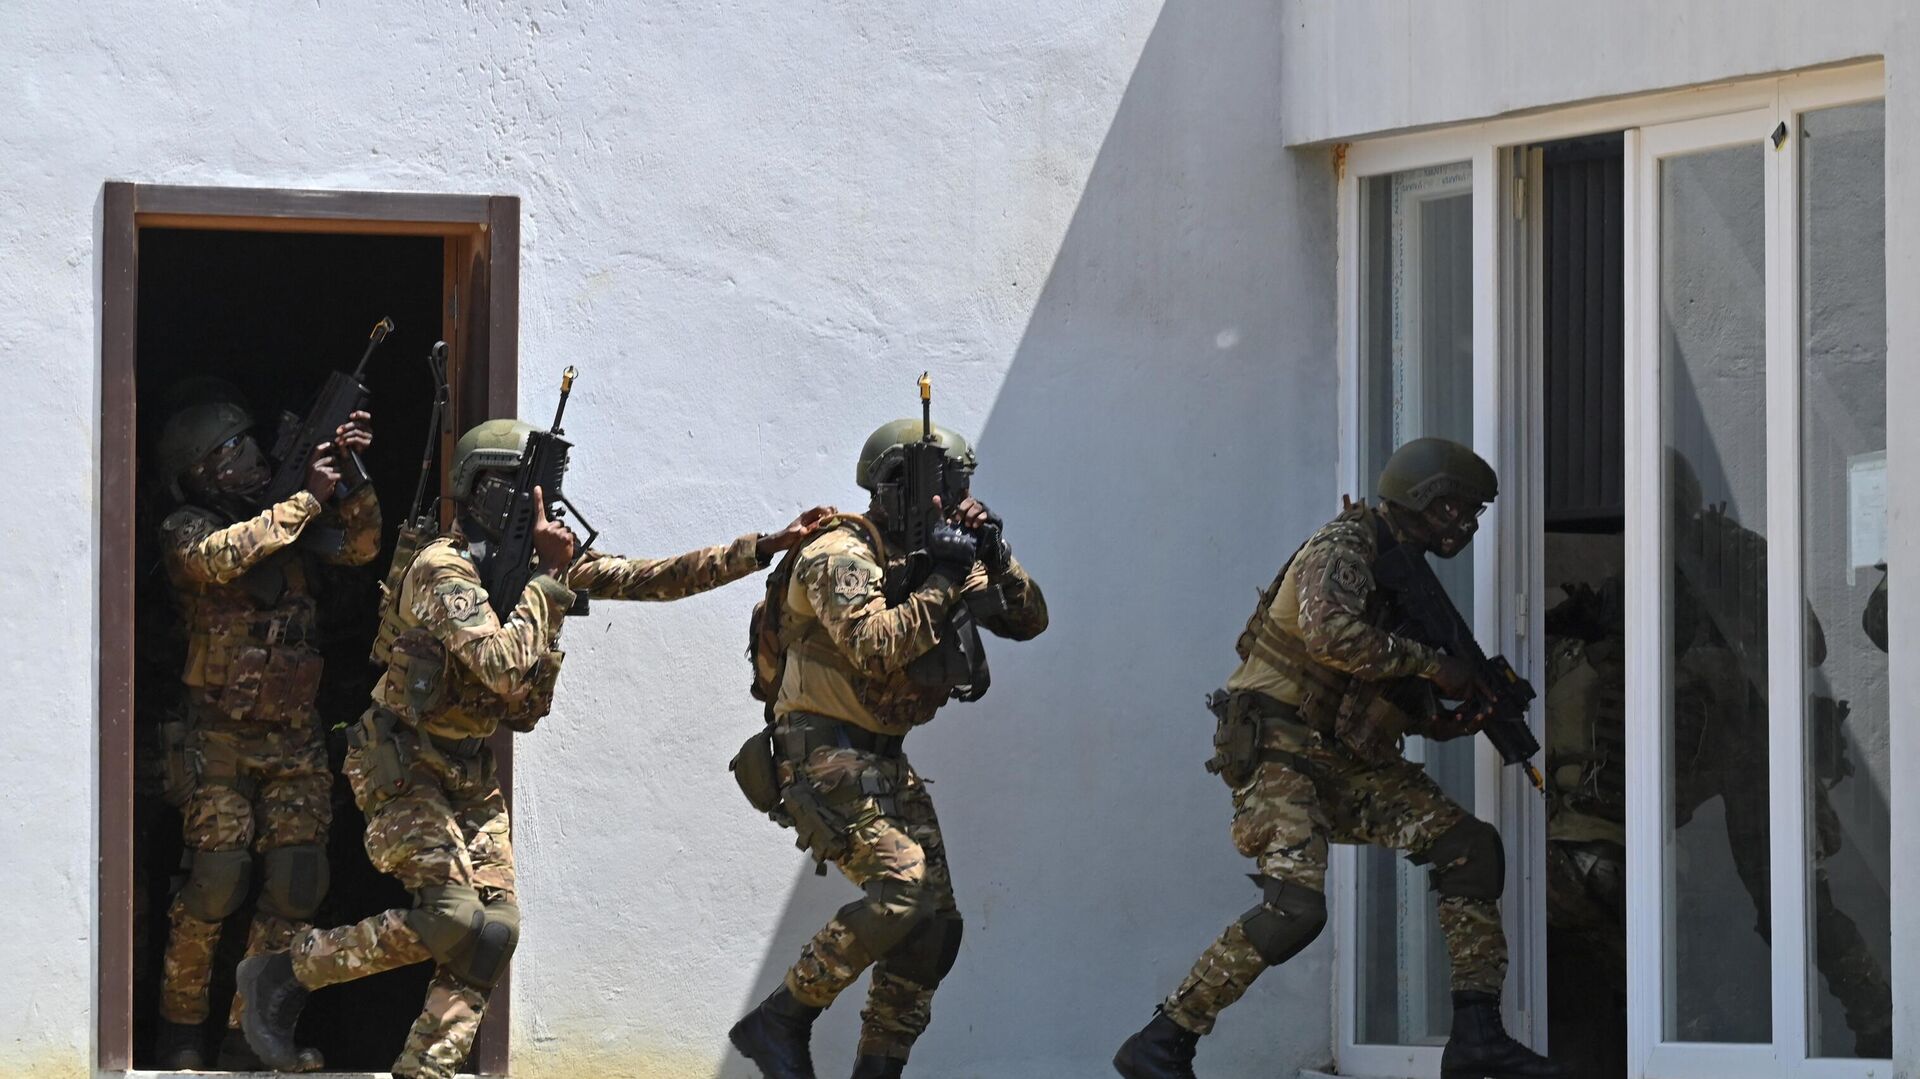 Ivorian special forces take part in the annual US-led Flintlock military training hosted by the Internationl Counter-Terrorism Academy, in Jacqueville, on March 14, 202 - Sputnik International, 1920, 18.03.2023